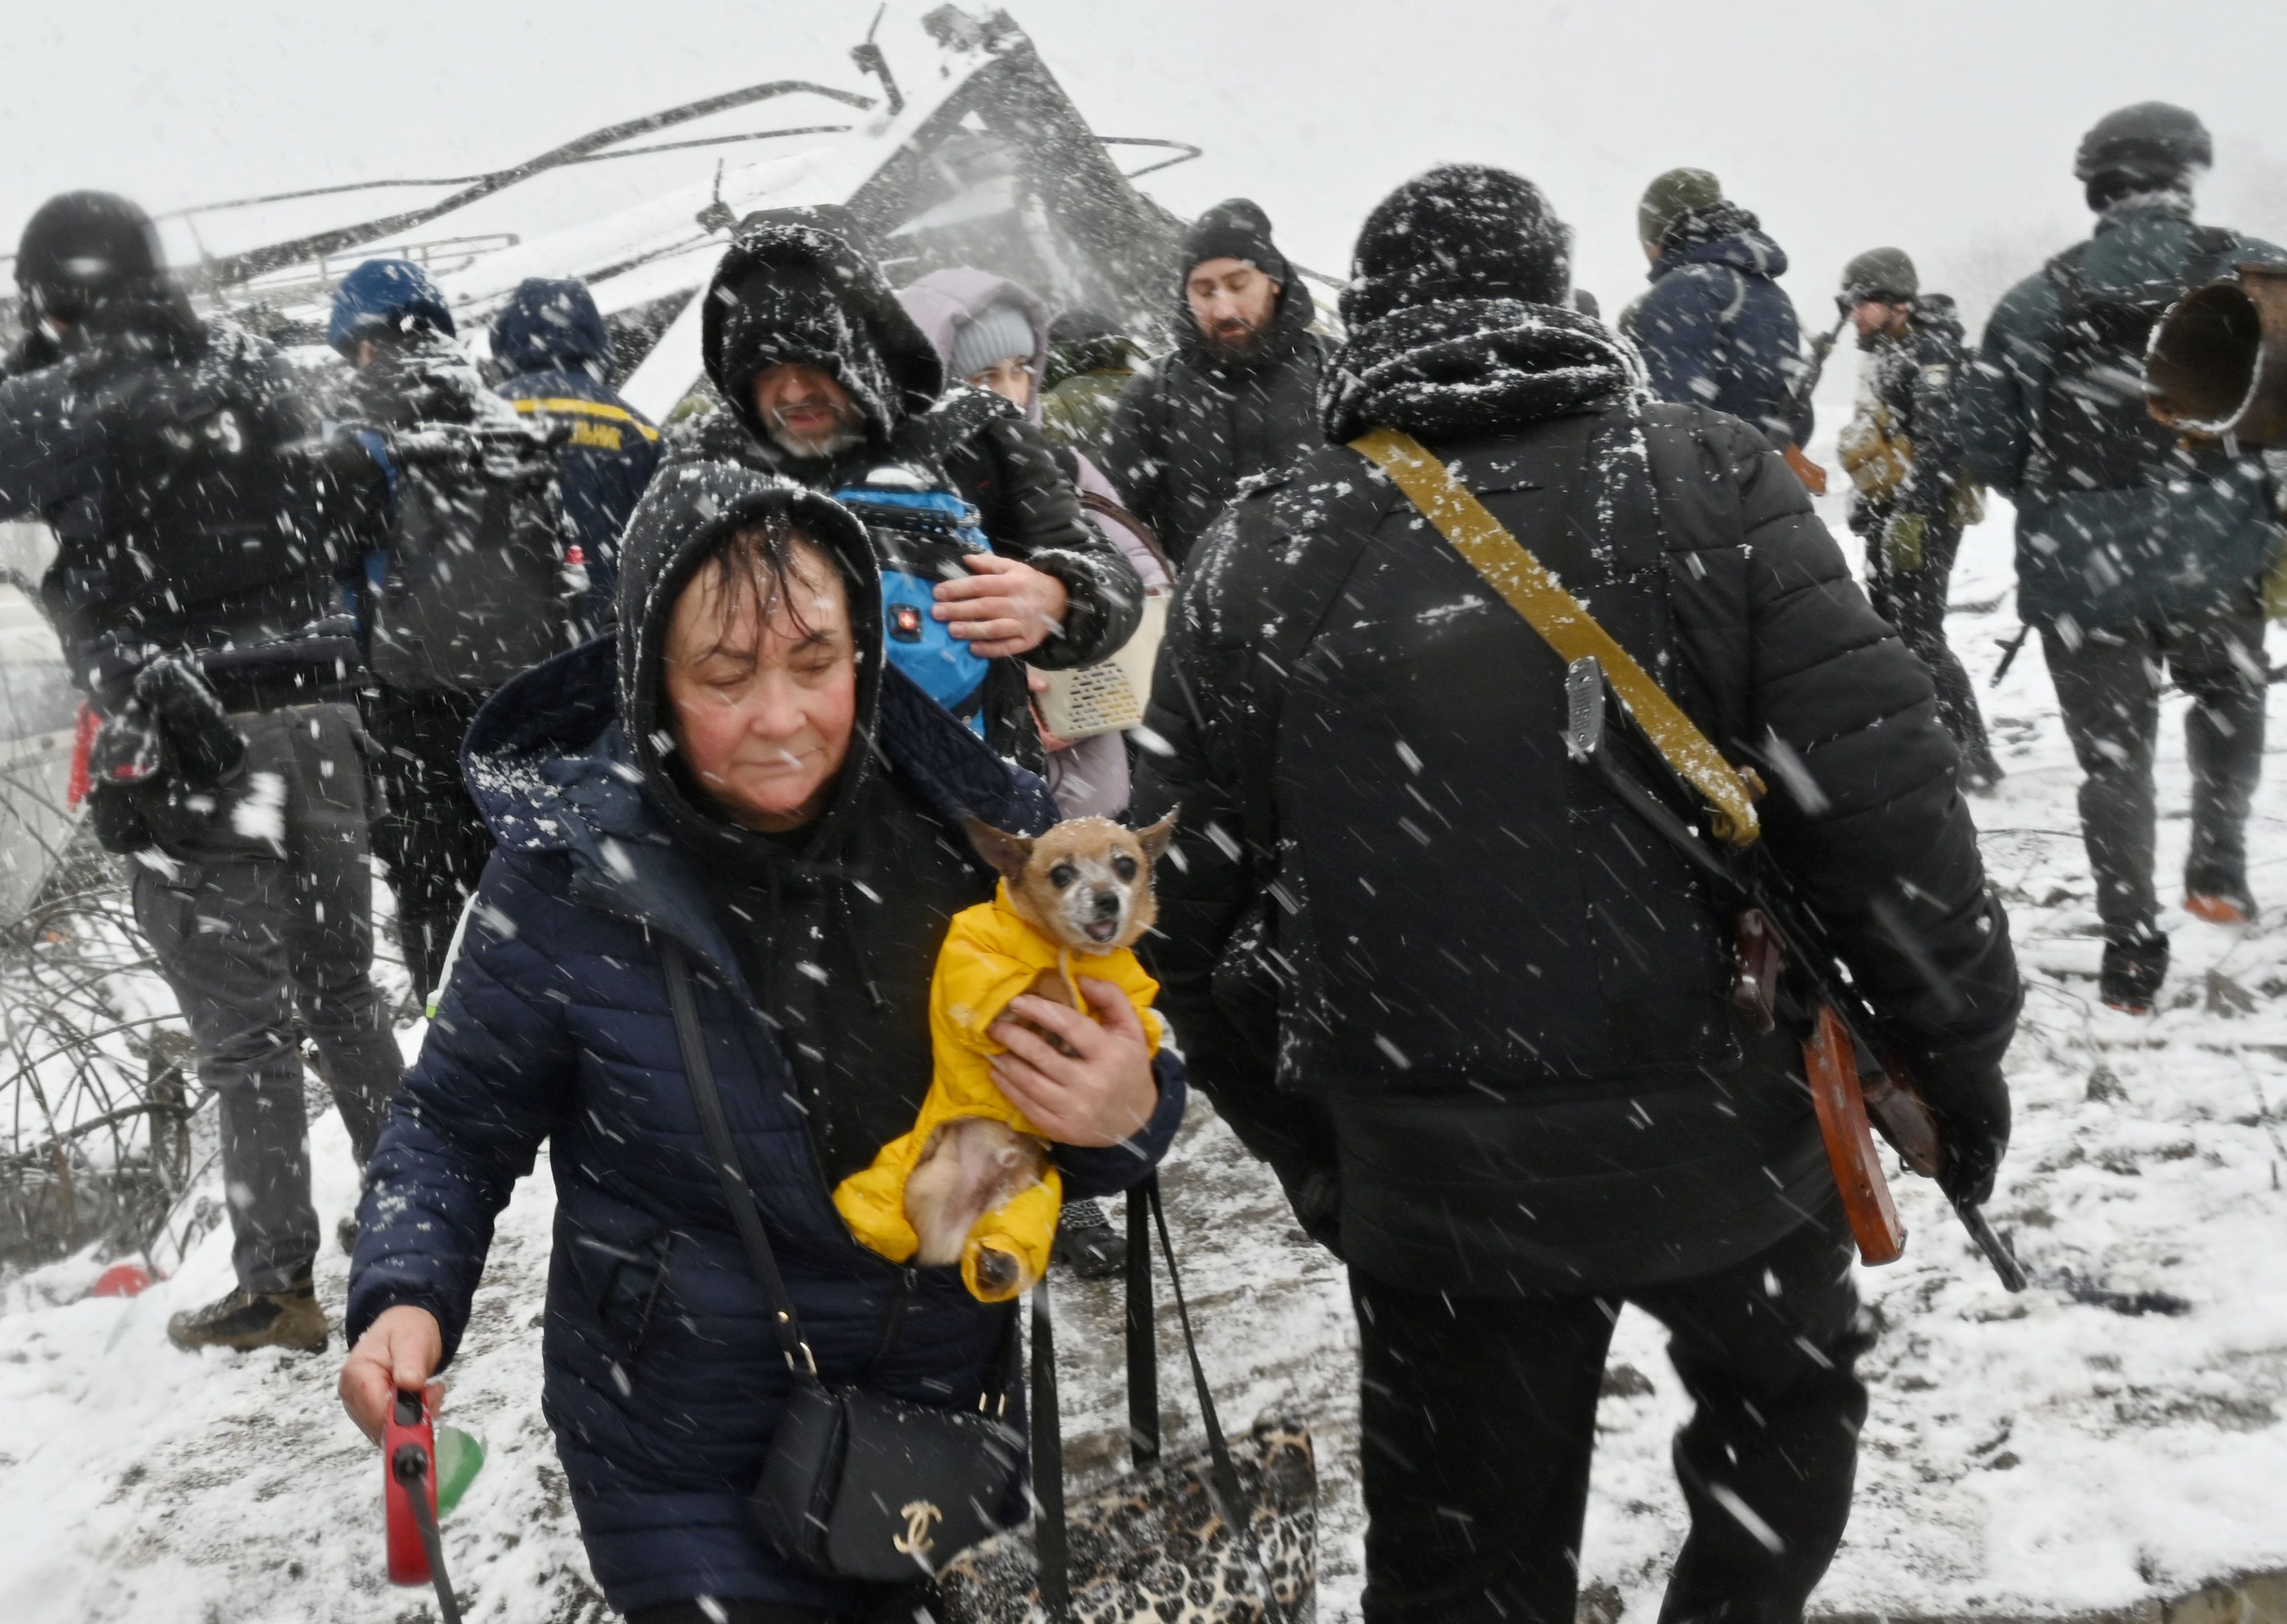  A woman carries her dog during the evacuation of Irpin, northwest of Kyiv, on March 8.